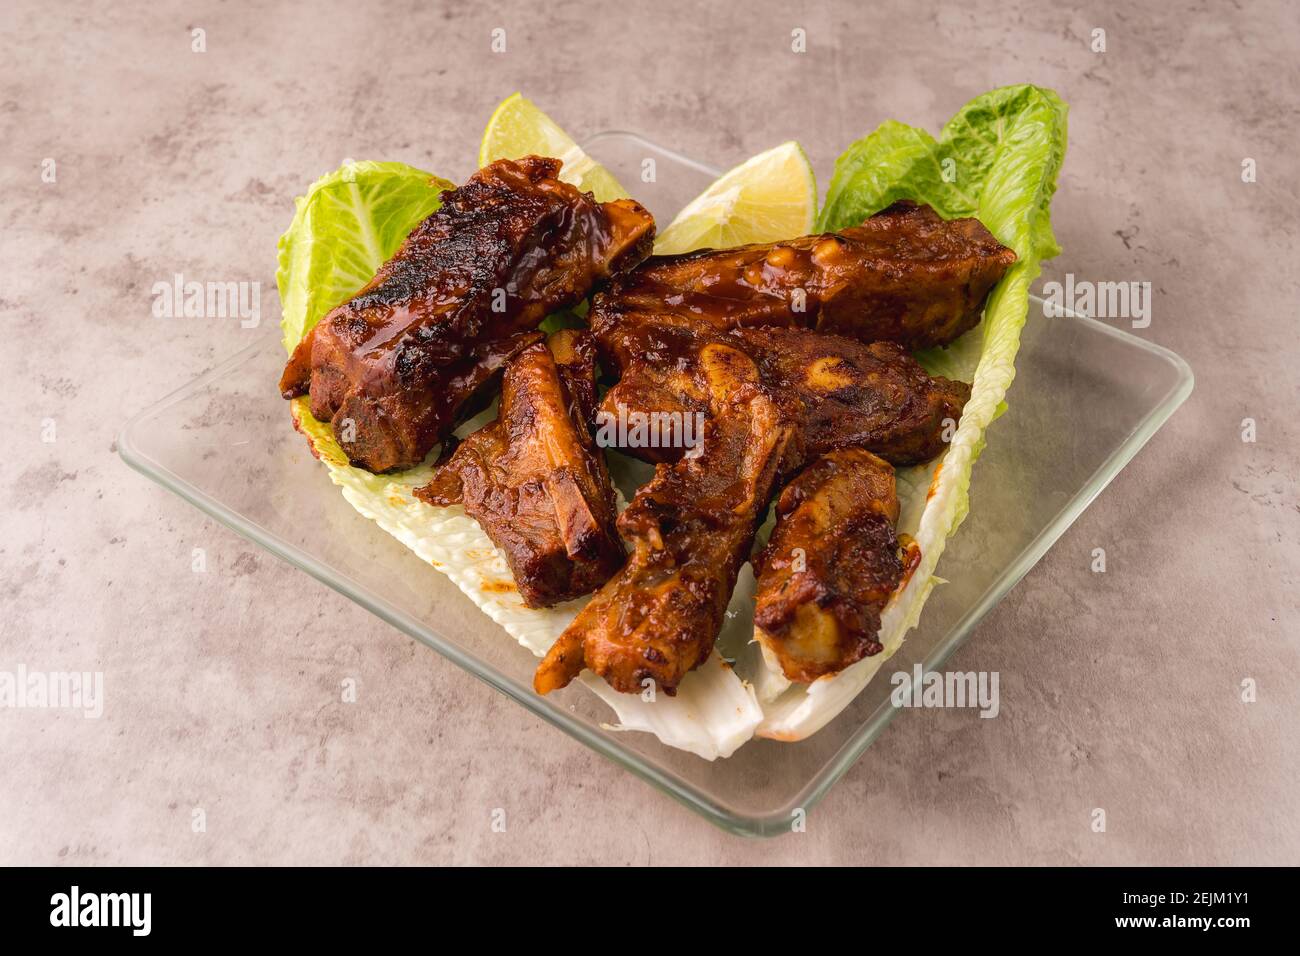 Plate of hot pork ribs prepared on the grill with BBQ sauce on a bed of fresh lettuce Stock Photo